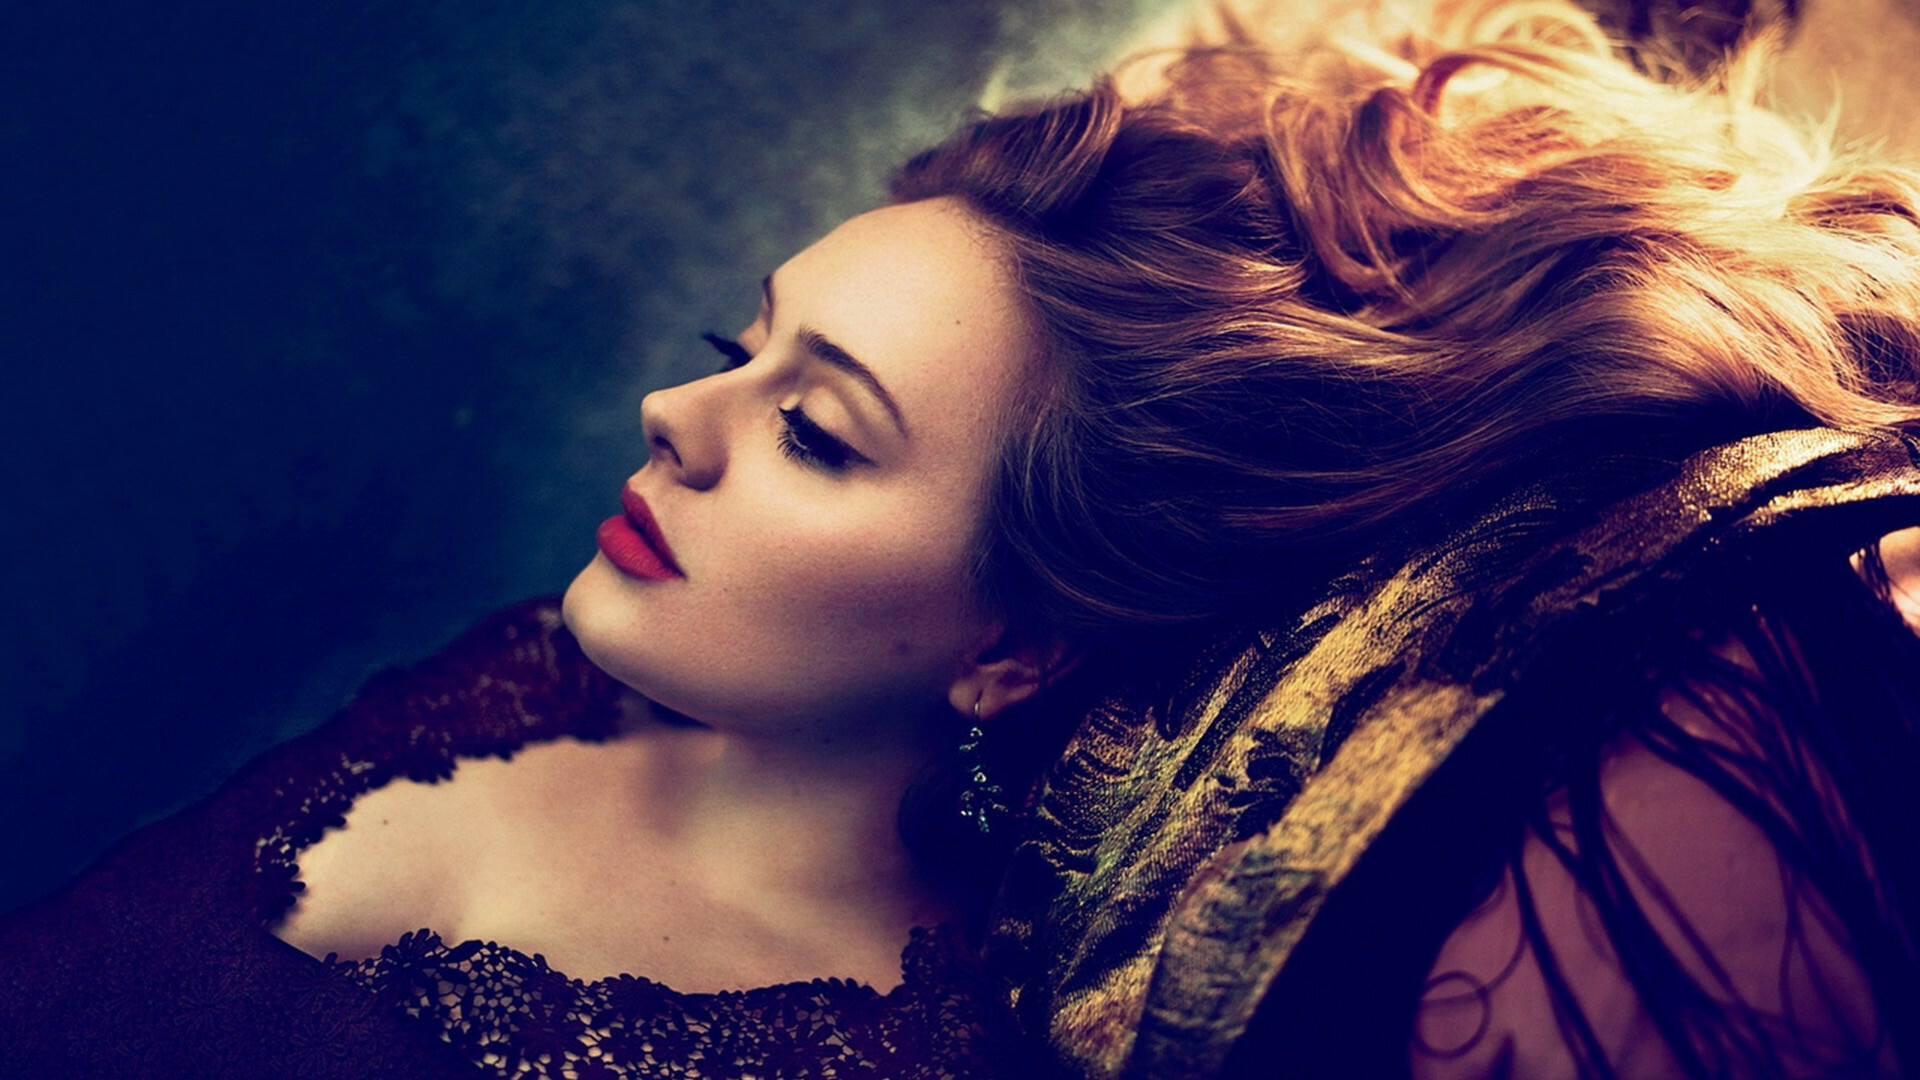 Adele: Three albums named after milestone ages - "19", "21" and "25". 1920x1080 Full HD Background.